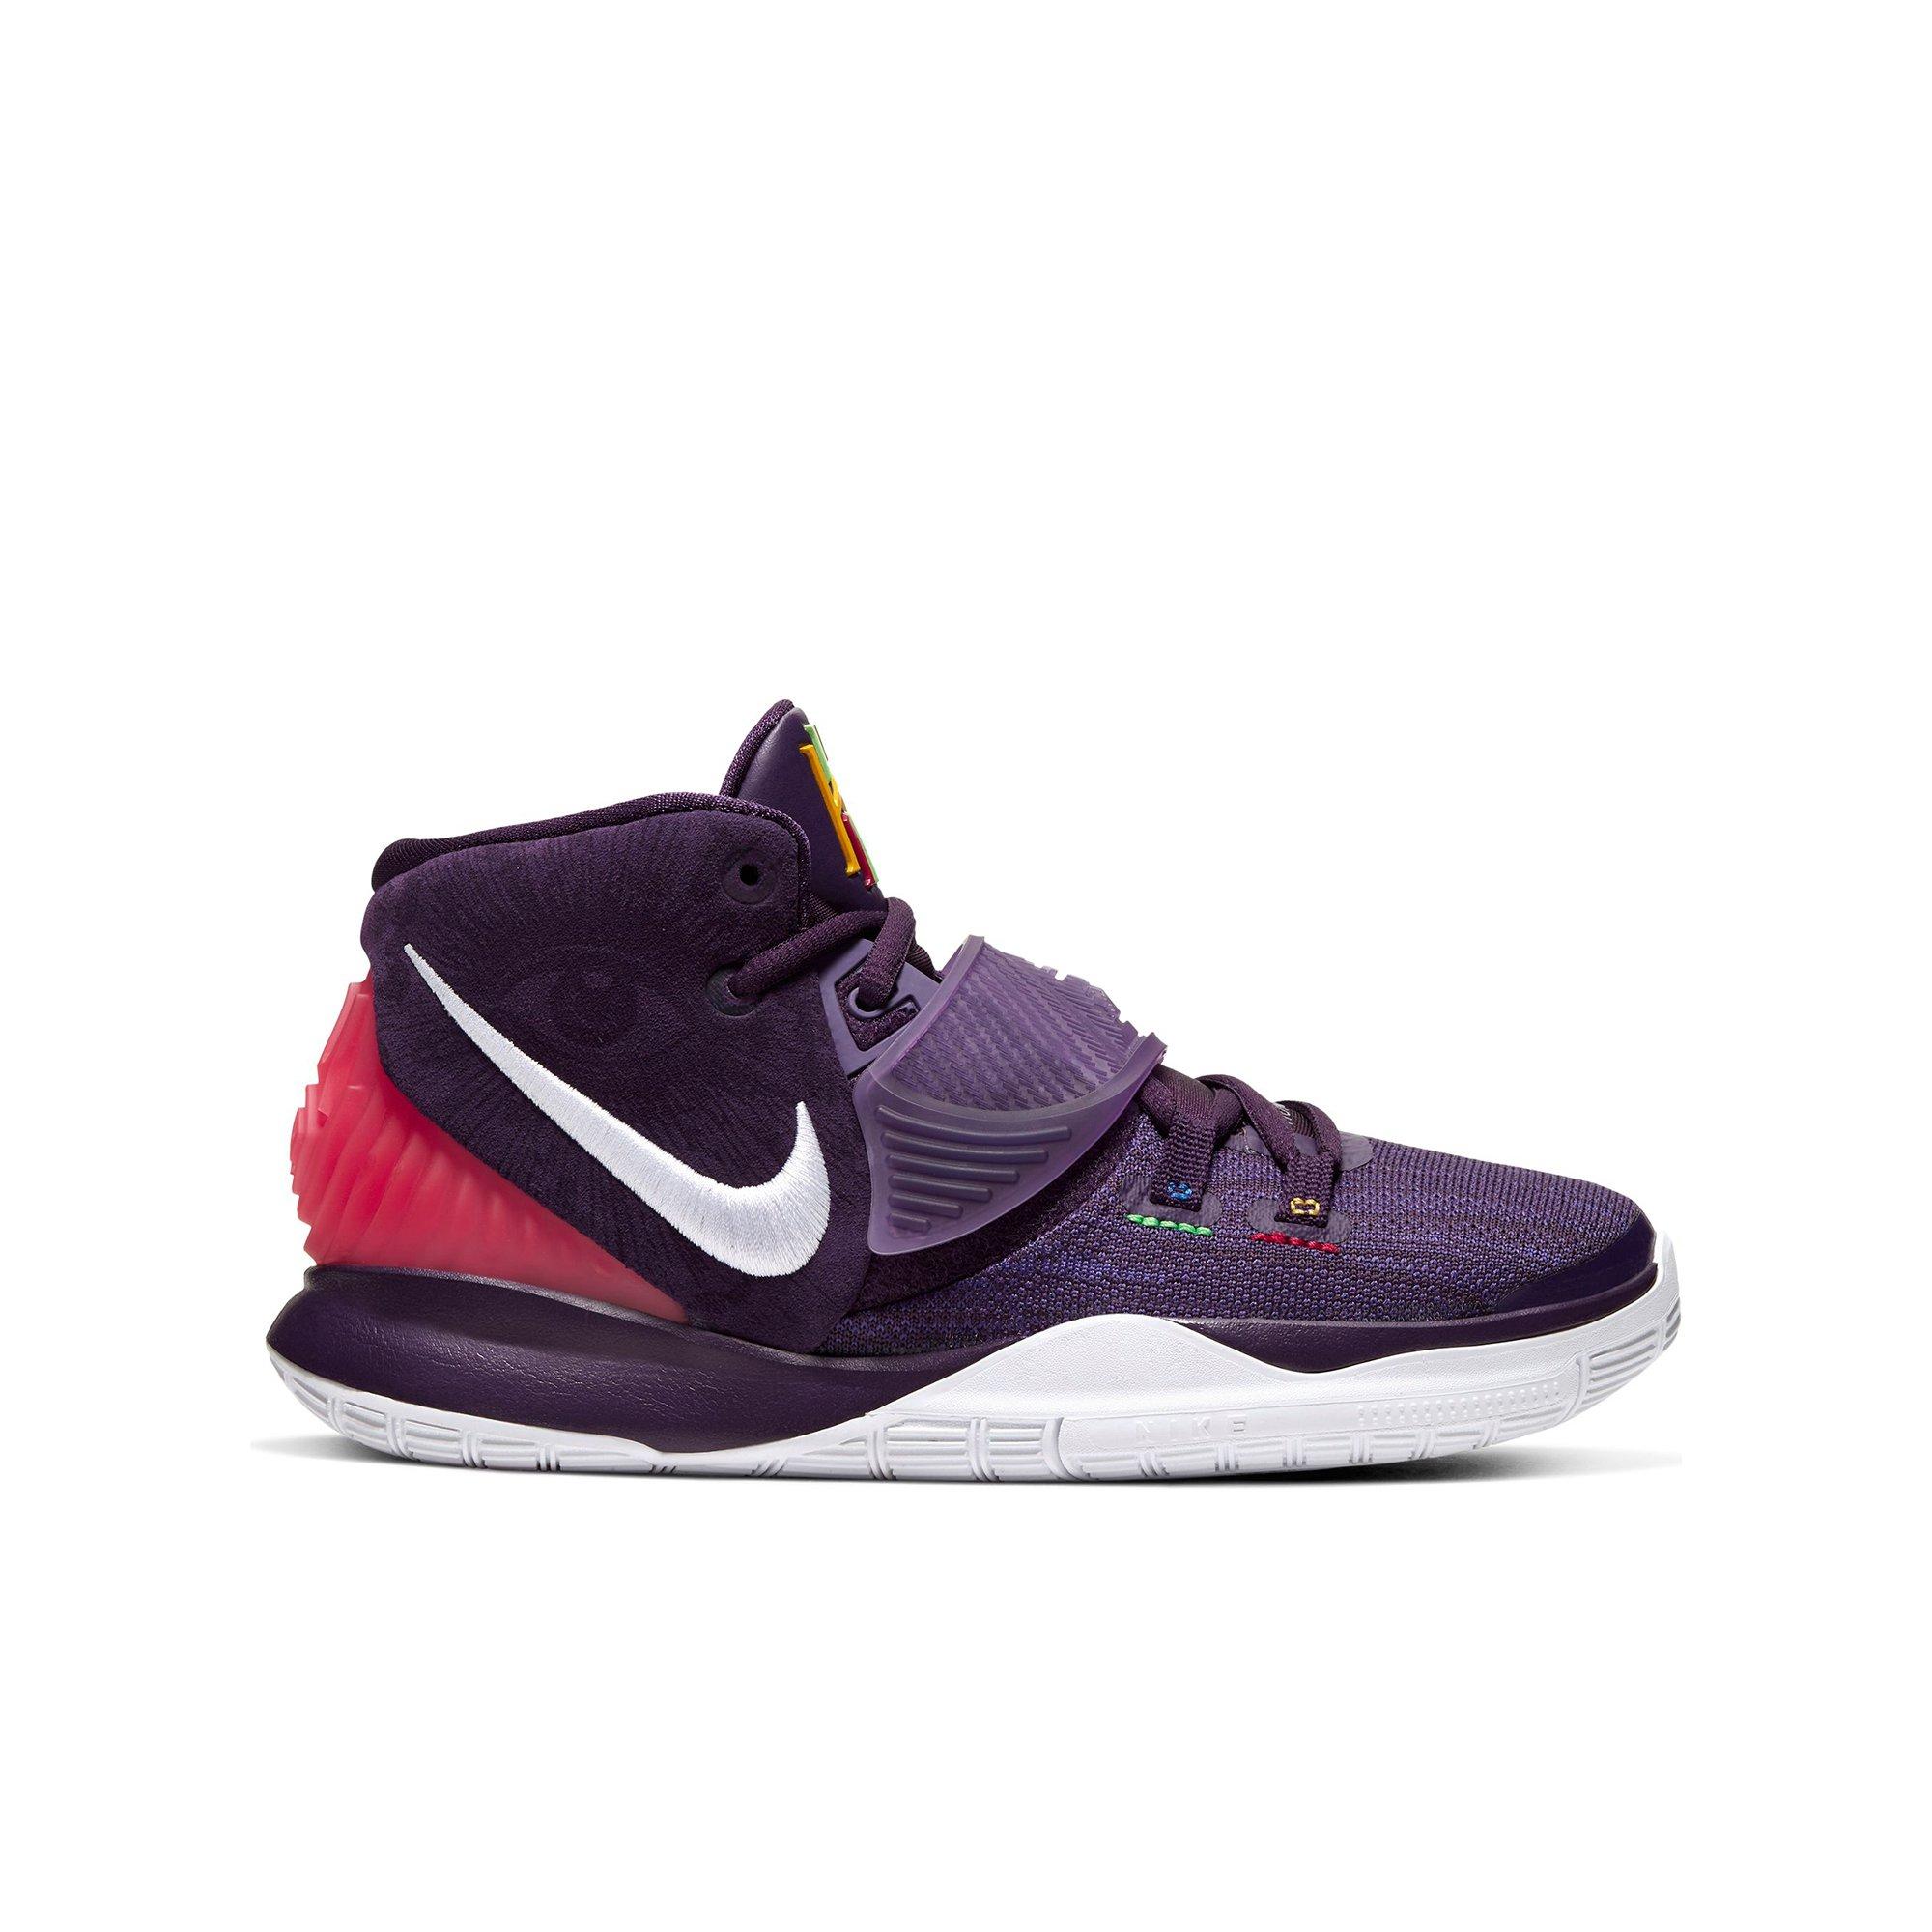 Small and New Theme Nike Kyrie S2 Kybrid 枋要发卮 Date promulgation Meile Tao tide